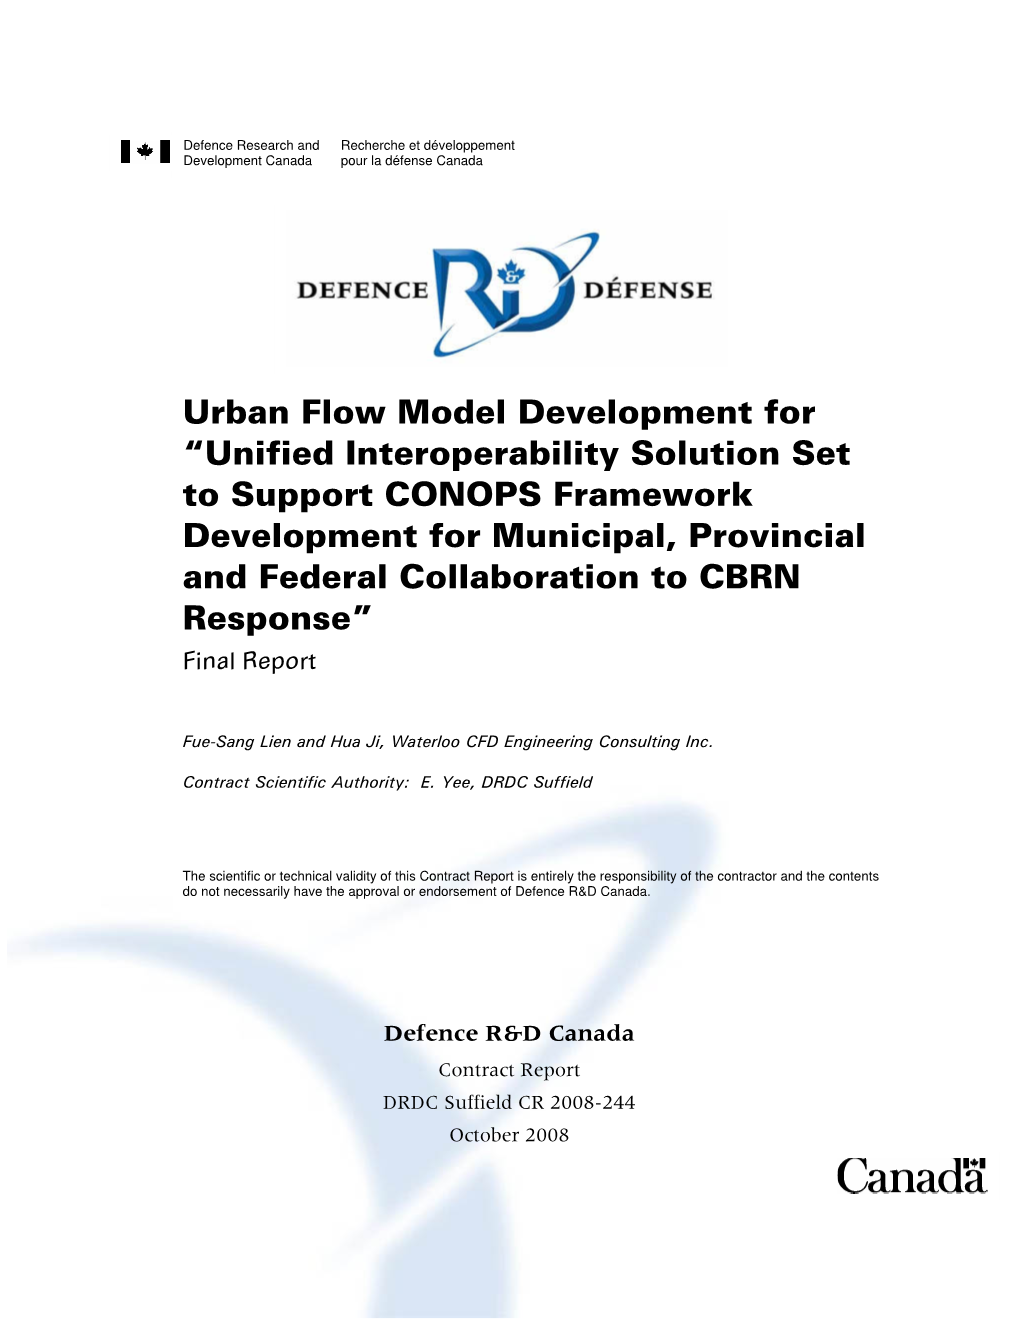 Unified Interoperability Solution Set to Support CONOPS Framework Development for Municipal, Provincial and Federal Collaboration to CBRN Response” Final Report